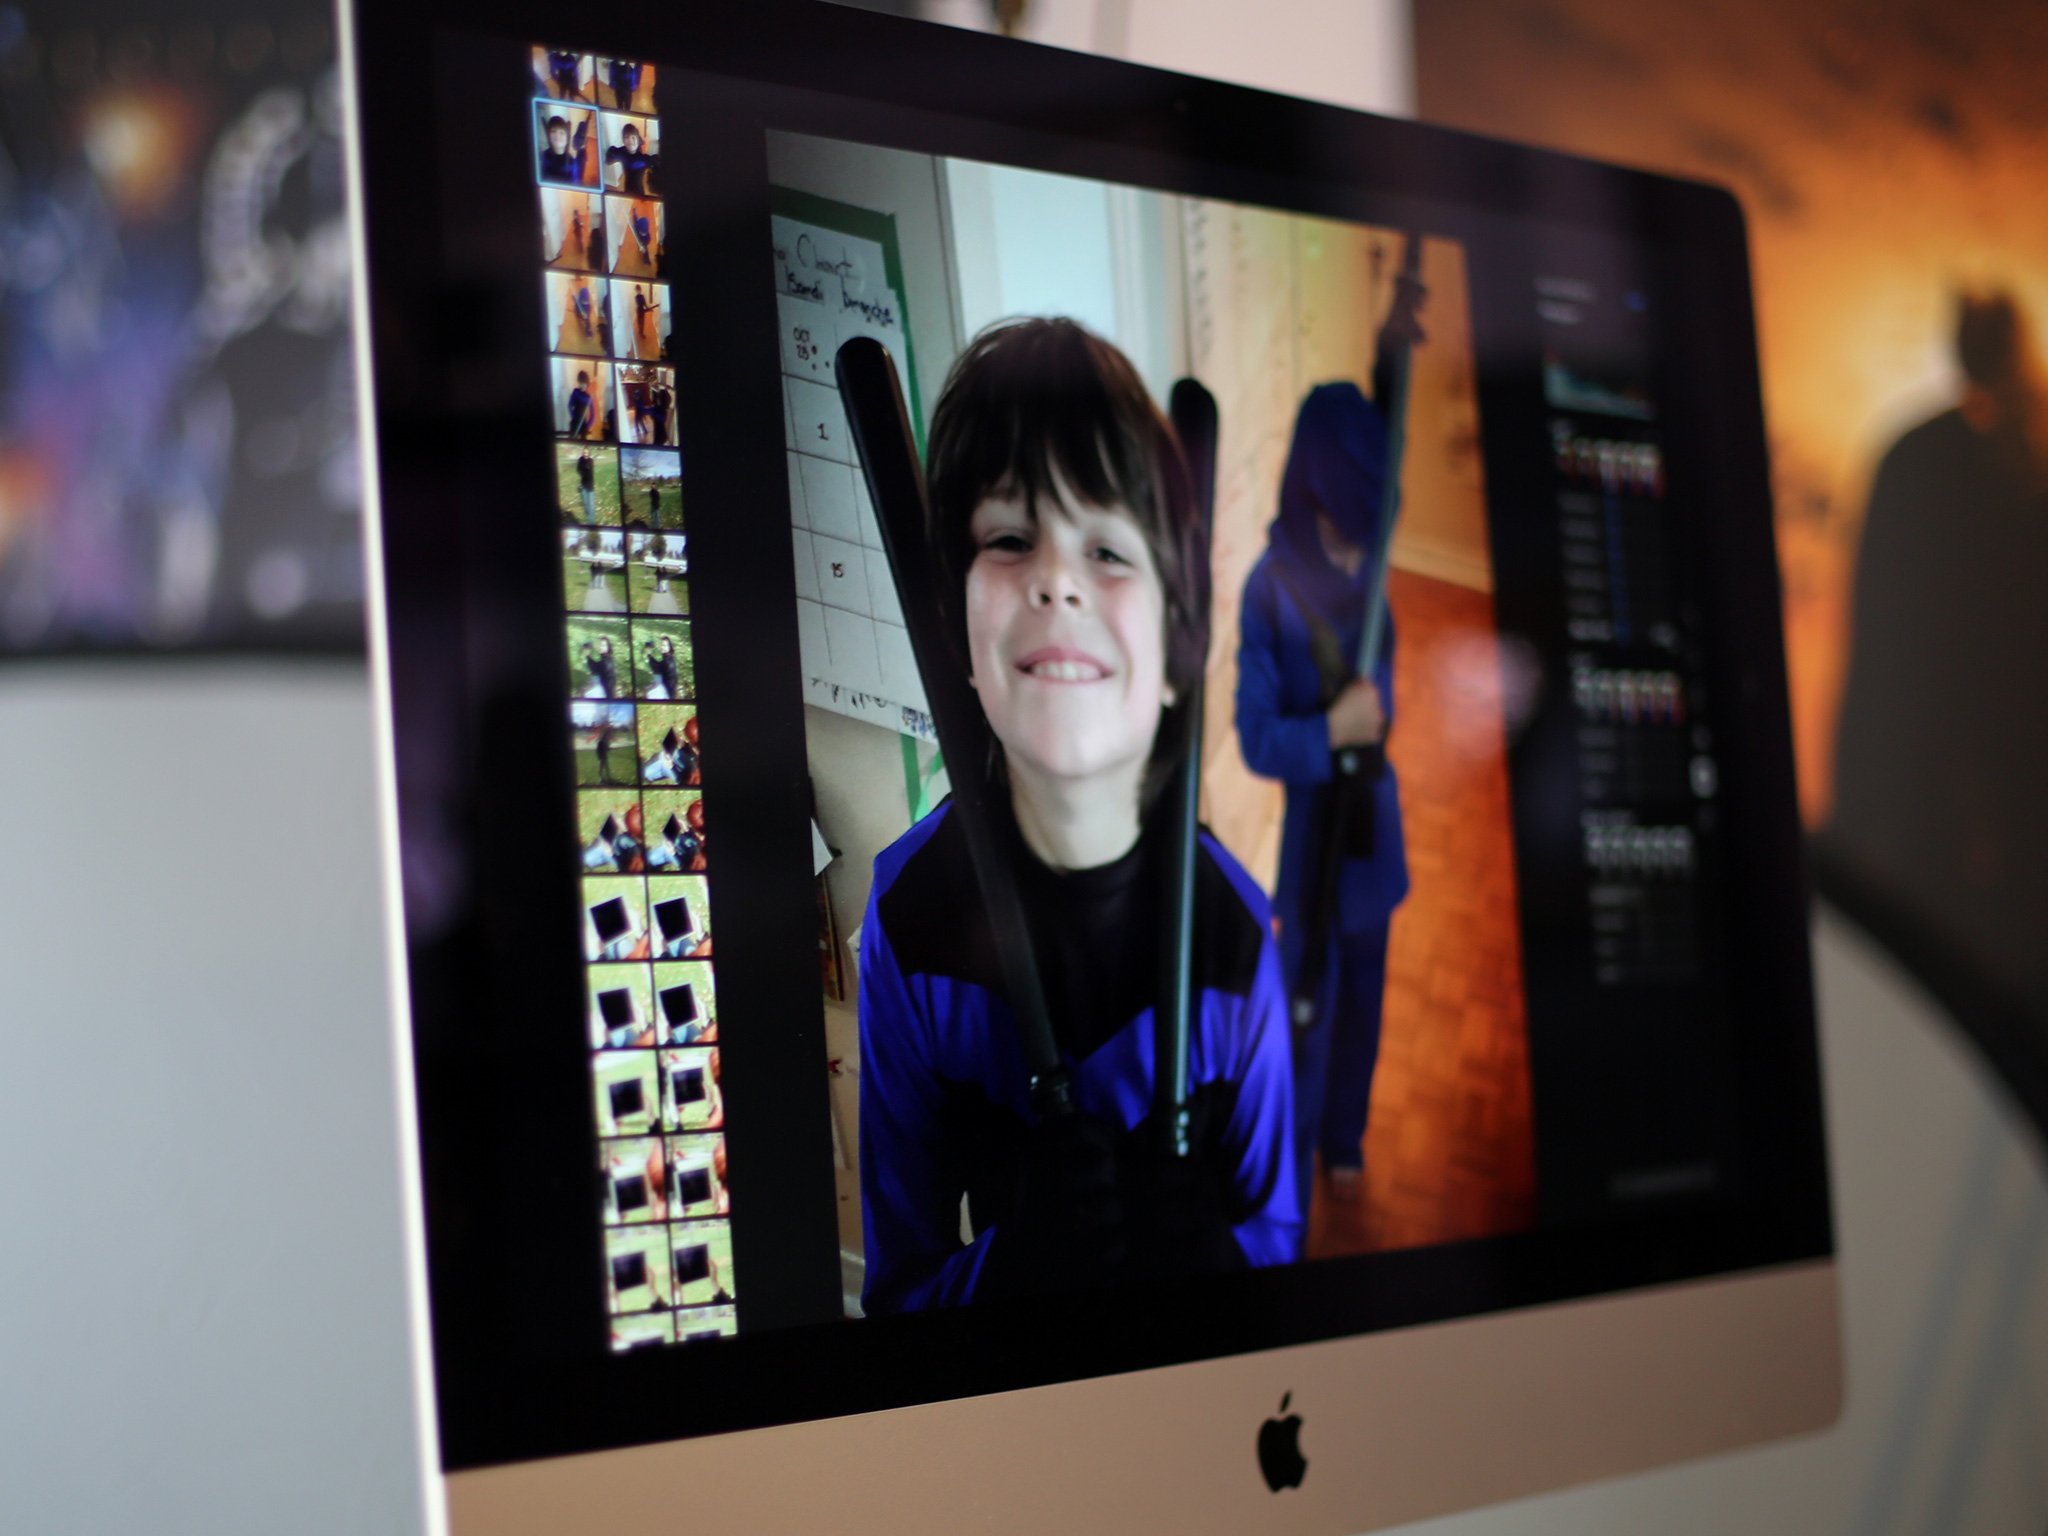 Photos for Mac first look: The future of ubiquitous photography approaches